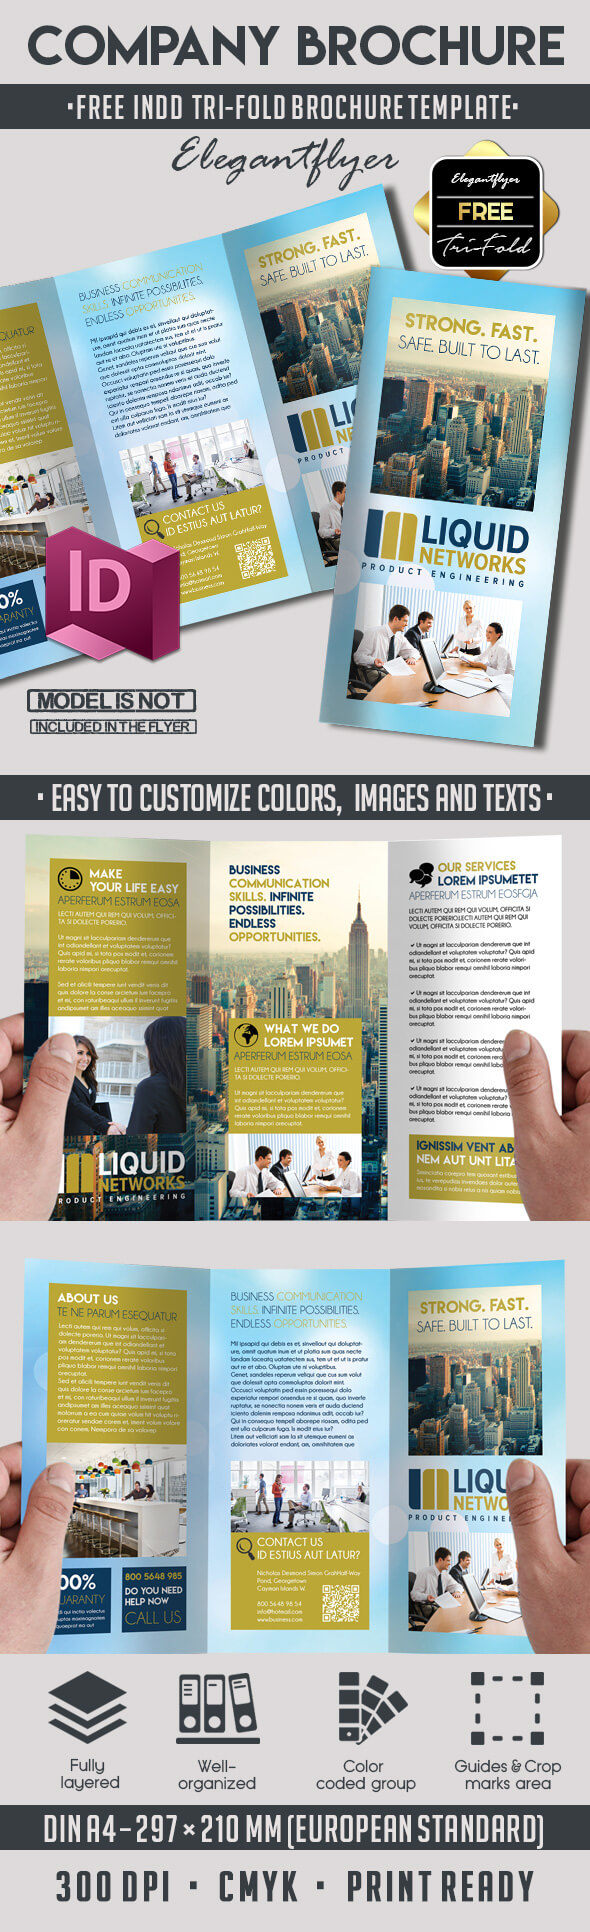 5 Powerful Free Adobe Indesign Brochures Templates! | Throughout Adobe Tri Fold Brochure Template